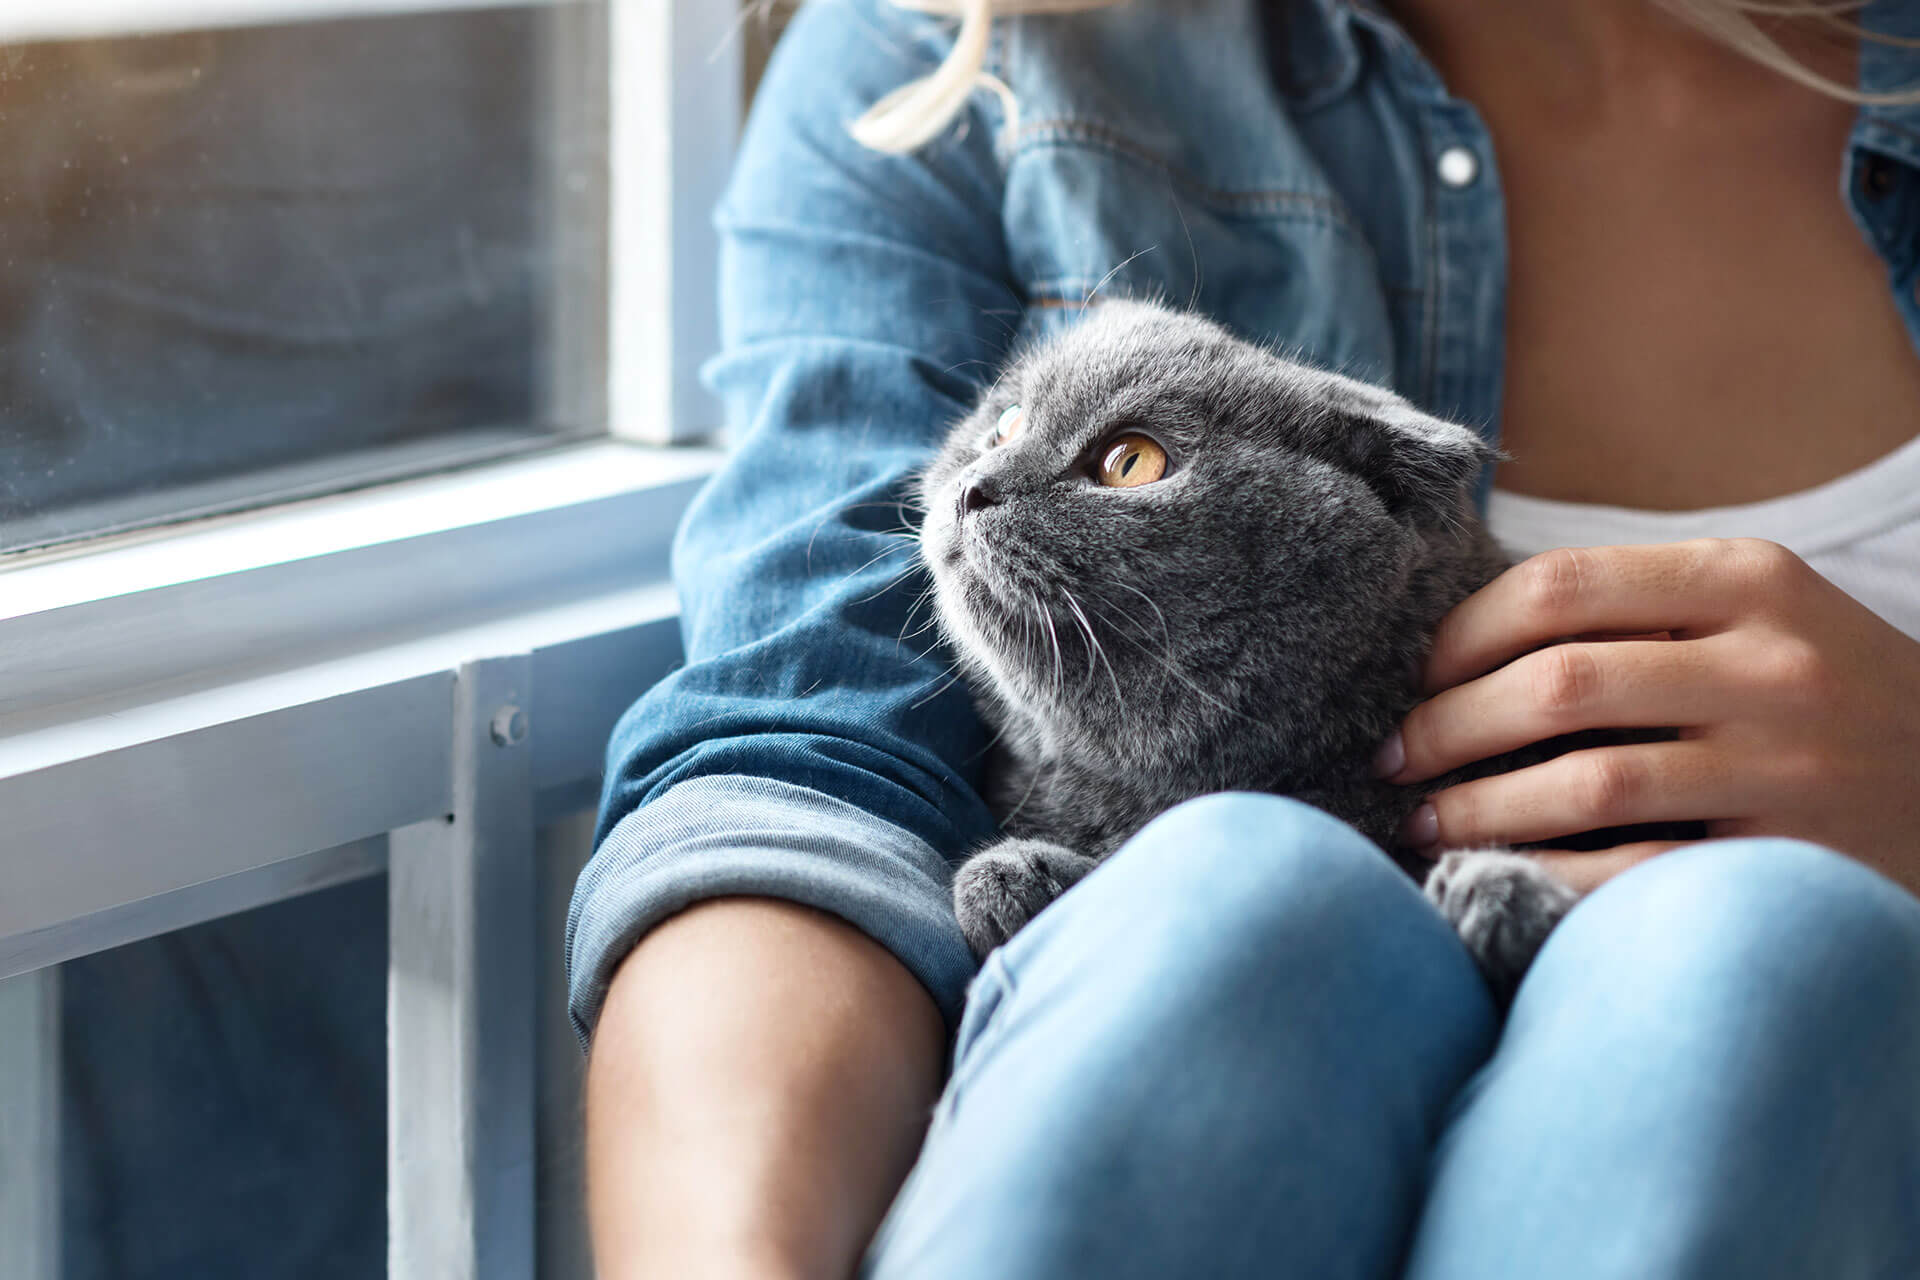 How To Care For A Kitten: A Guide For First-Time Cat Owners